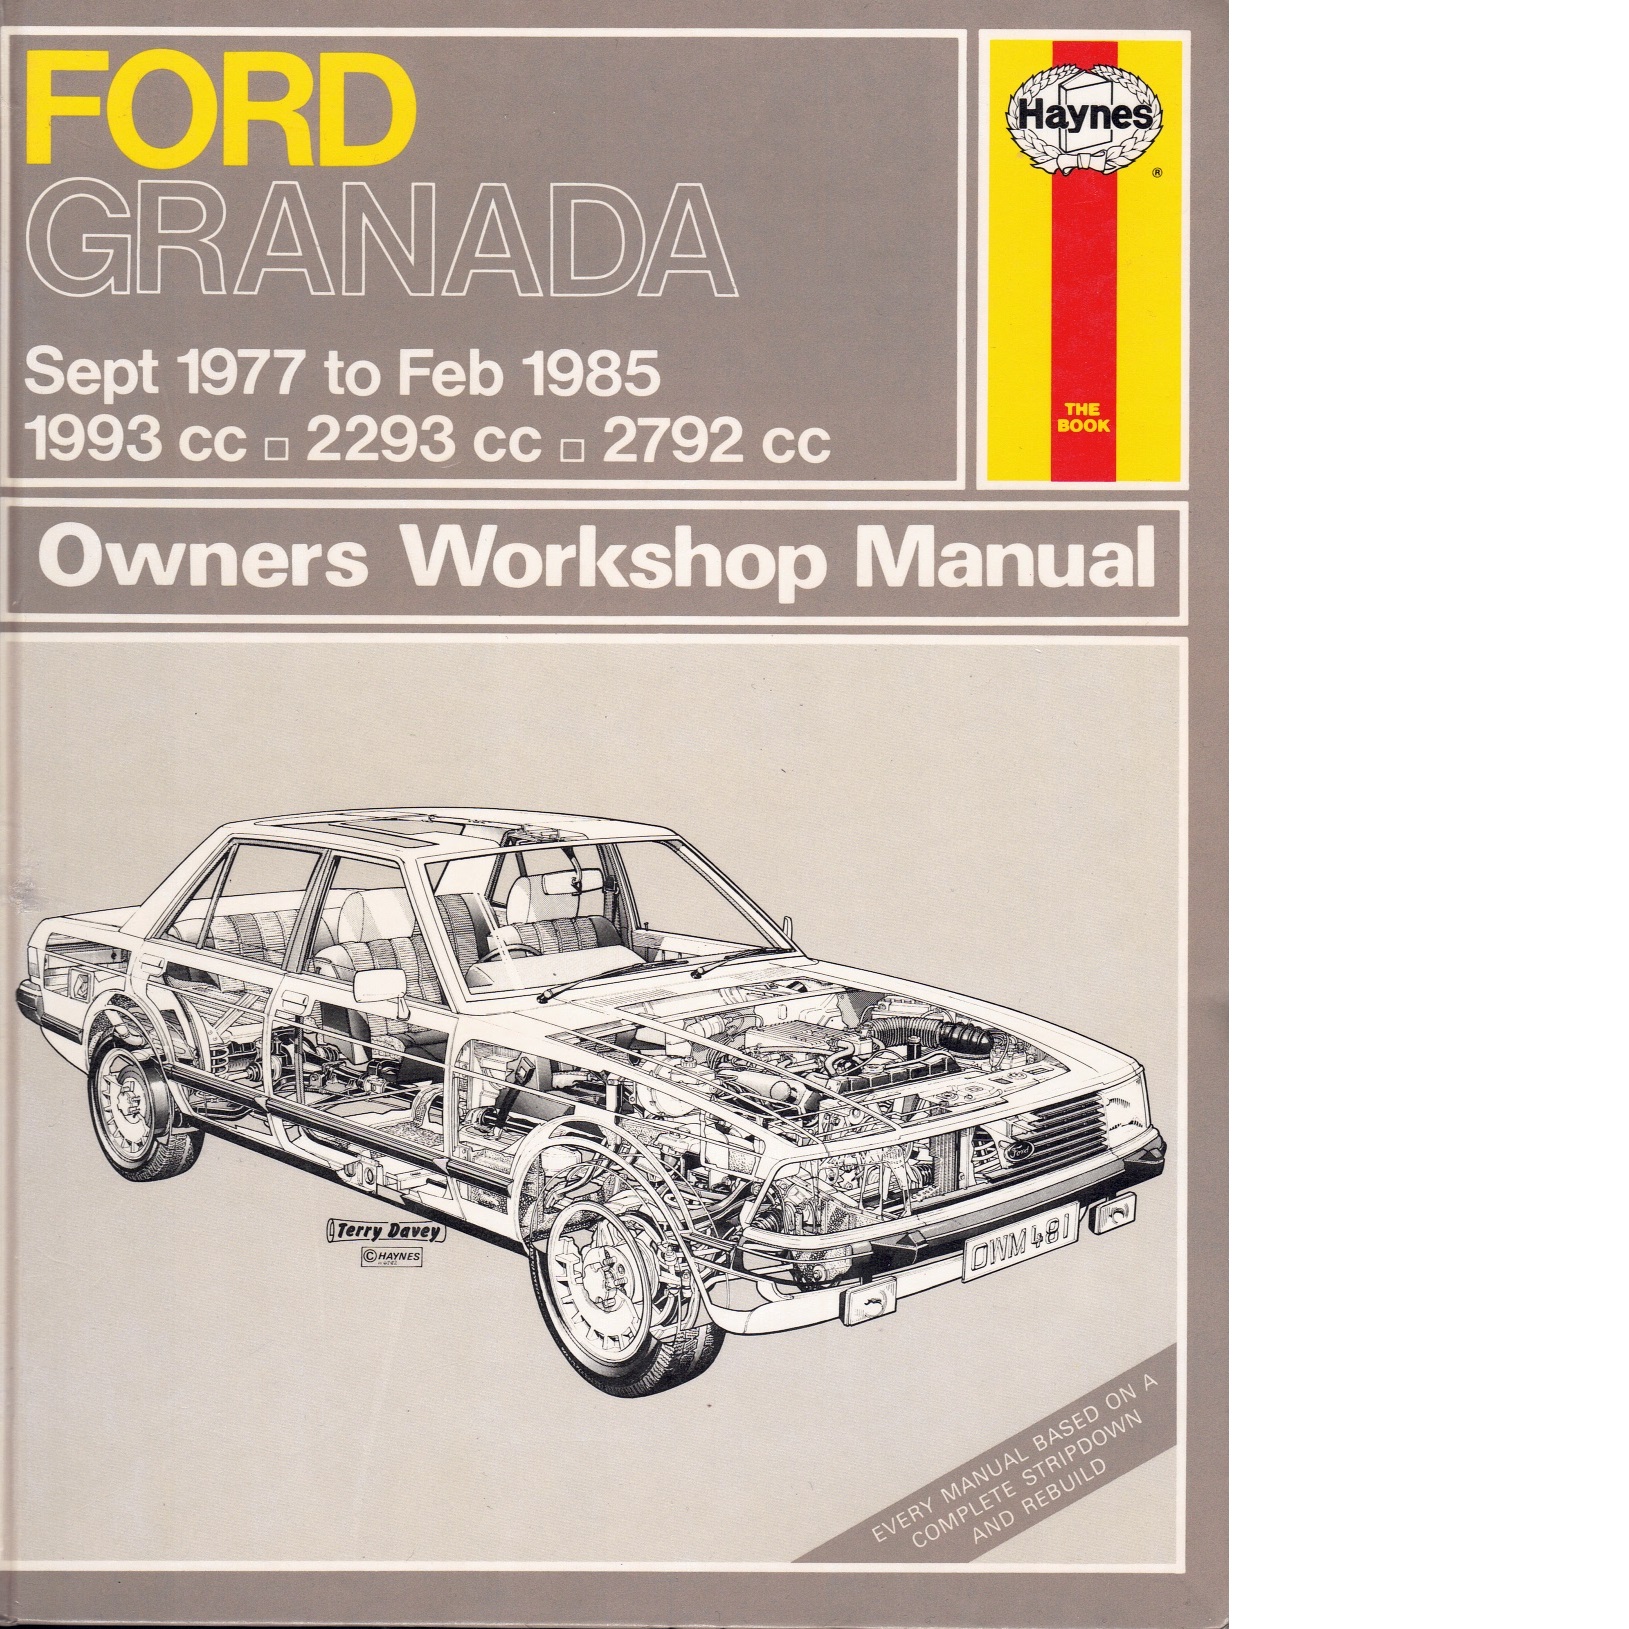 Ford Granada sept 1977-feb 1985. Owners Workshop Manual - Red.